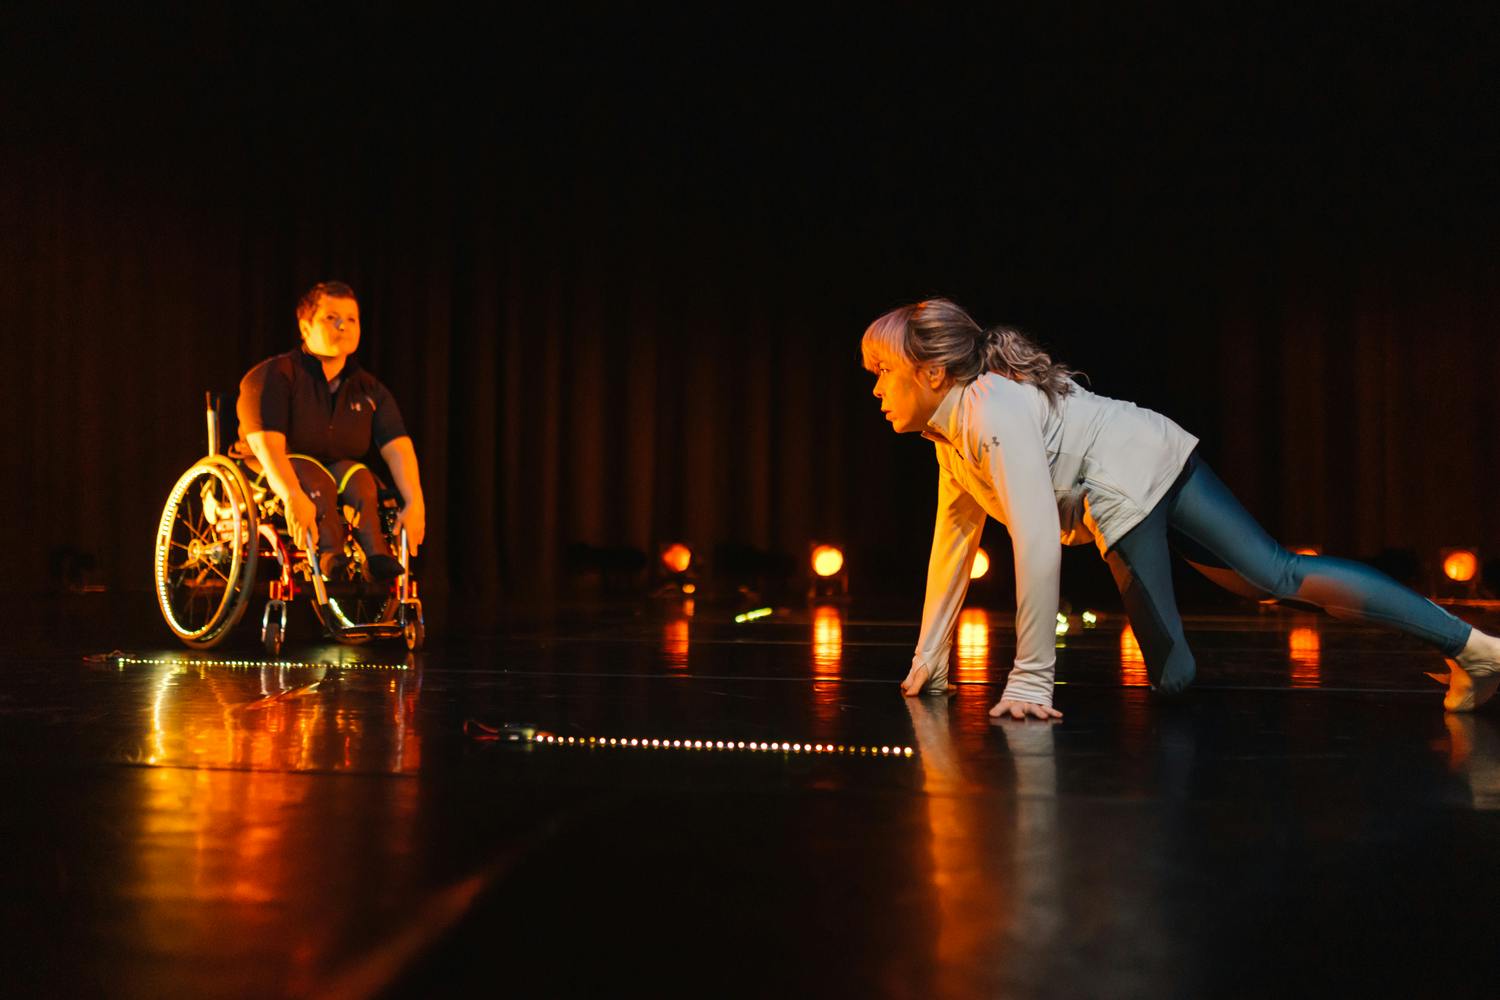 On stage are two female performers with disabilities, one in a wheelchair and the other on crutches. On the right, having abandoned her crutches, the dancer moves across the floor toward the dancer in the wheelchair.